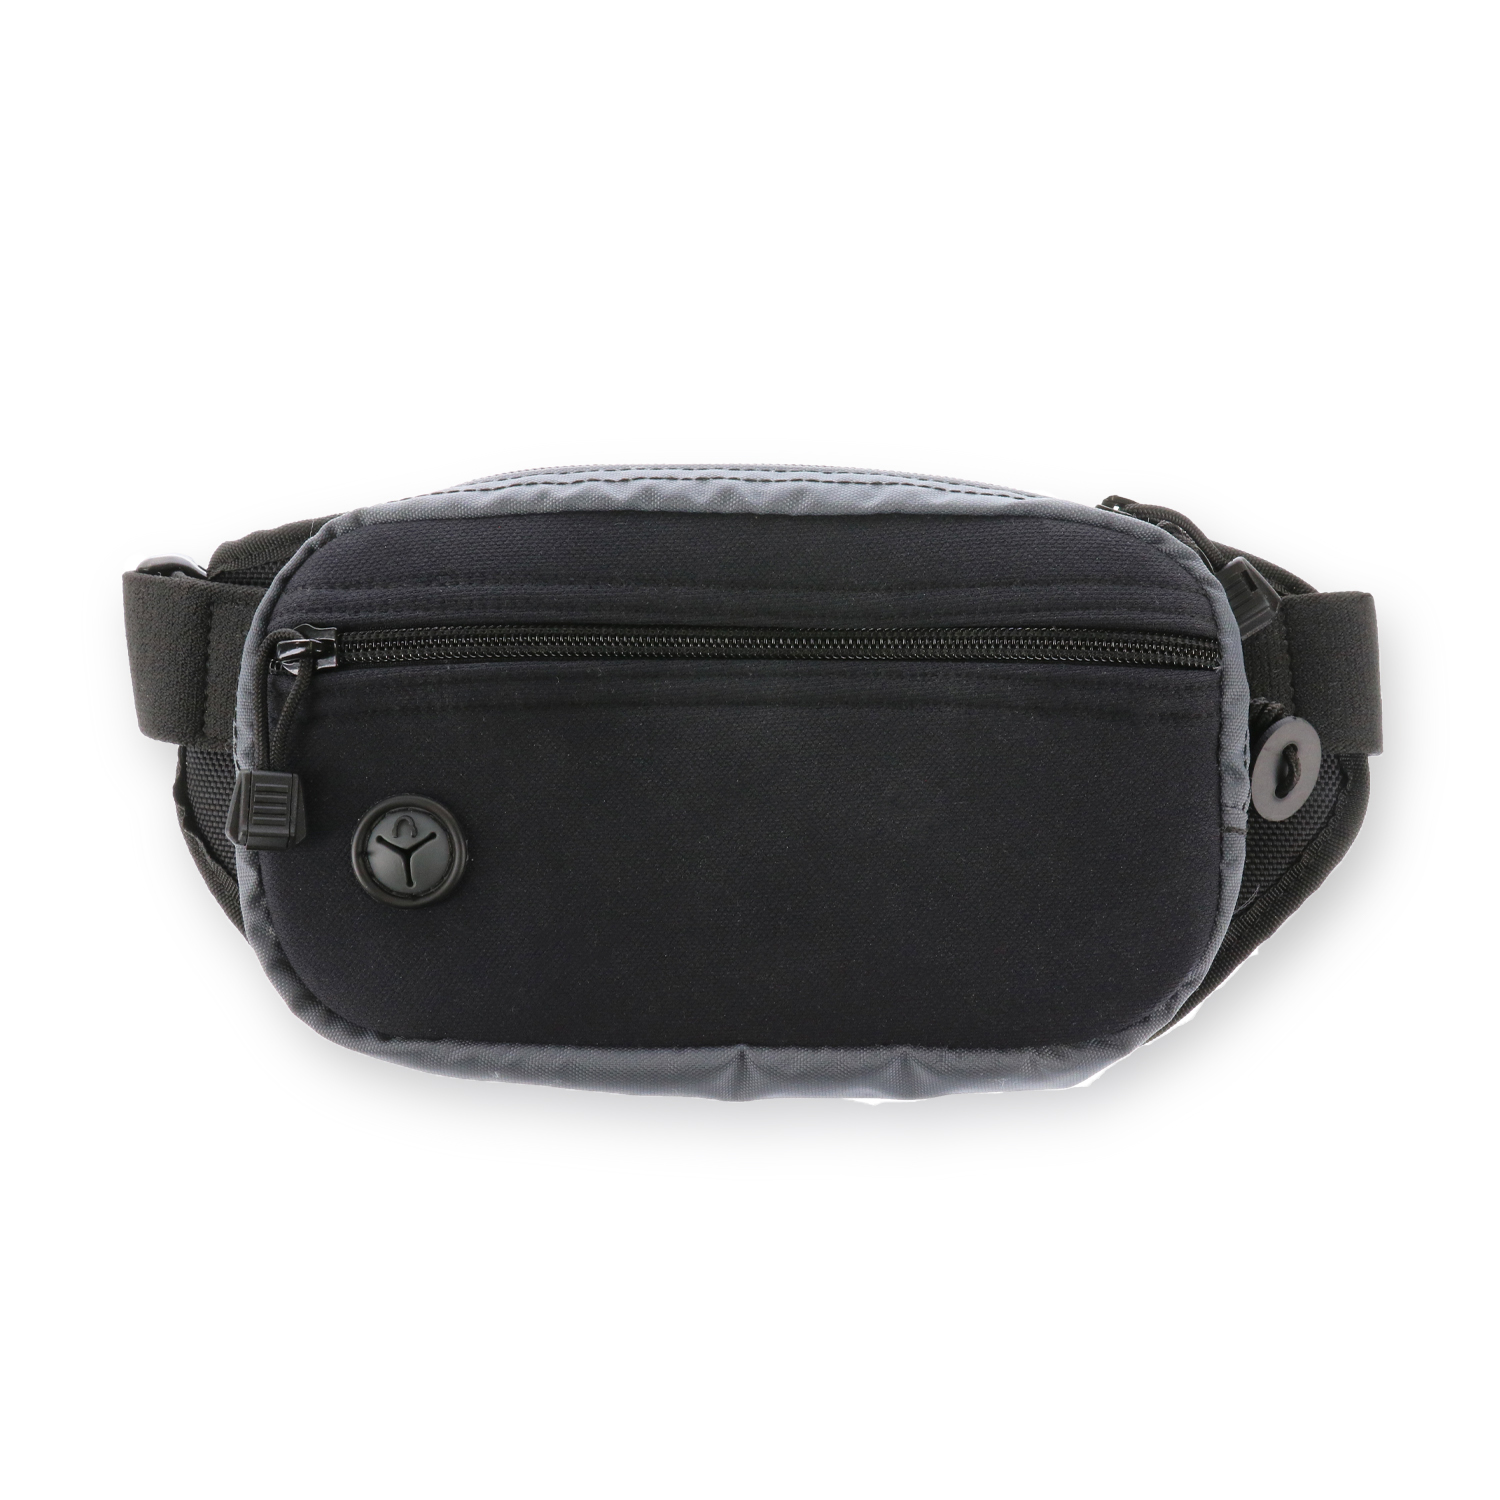 FasTrax PAC Waistpack (Compact) Handgun Holster by Galco - IS